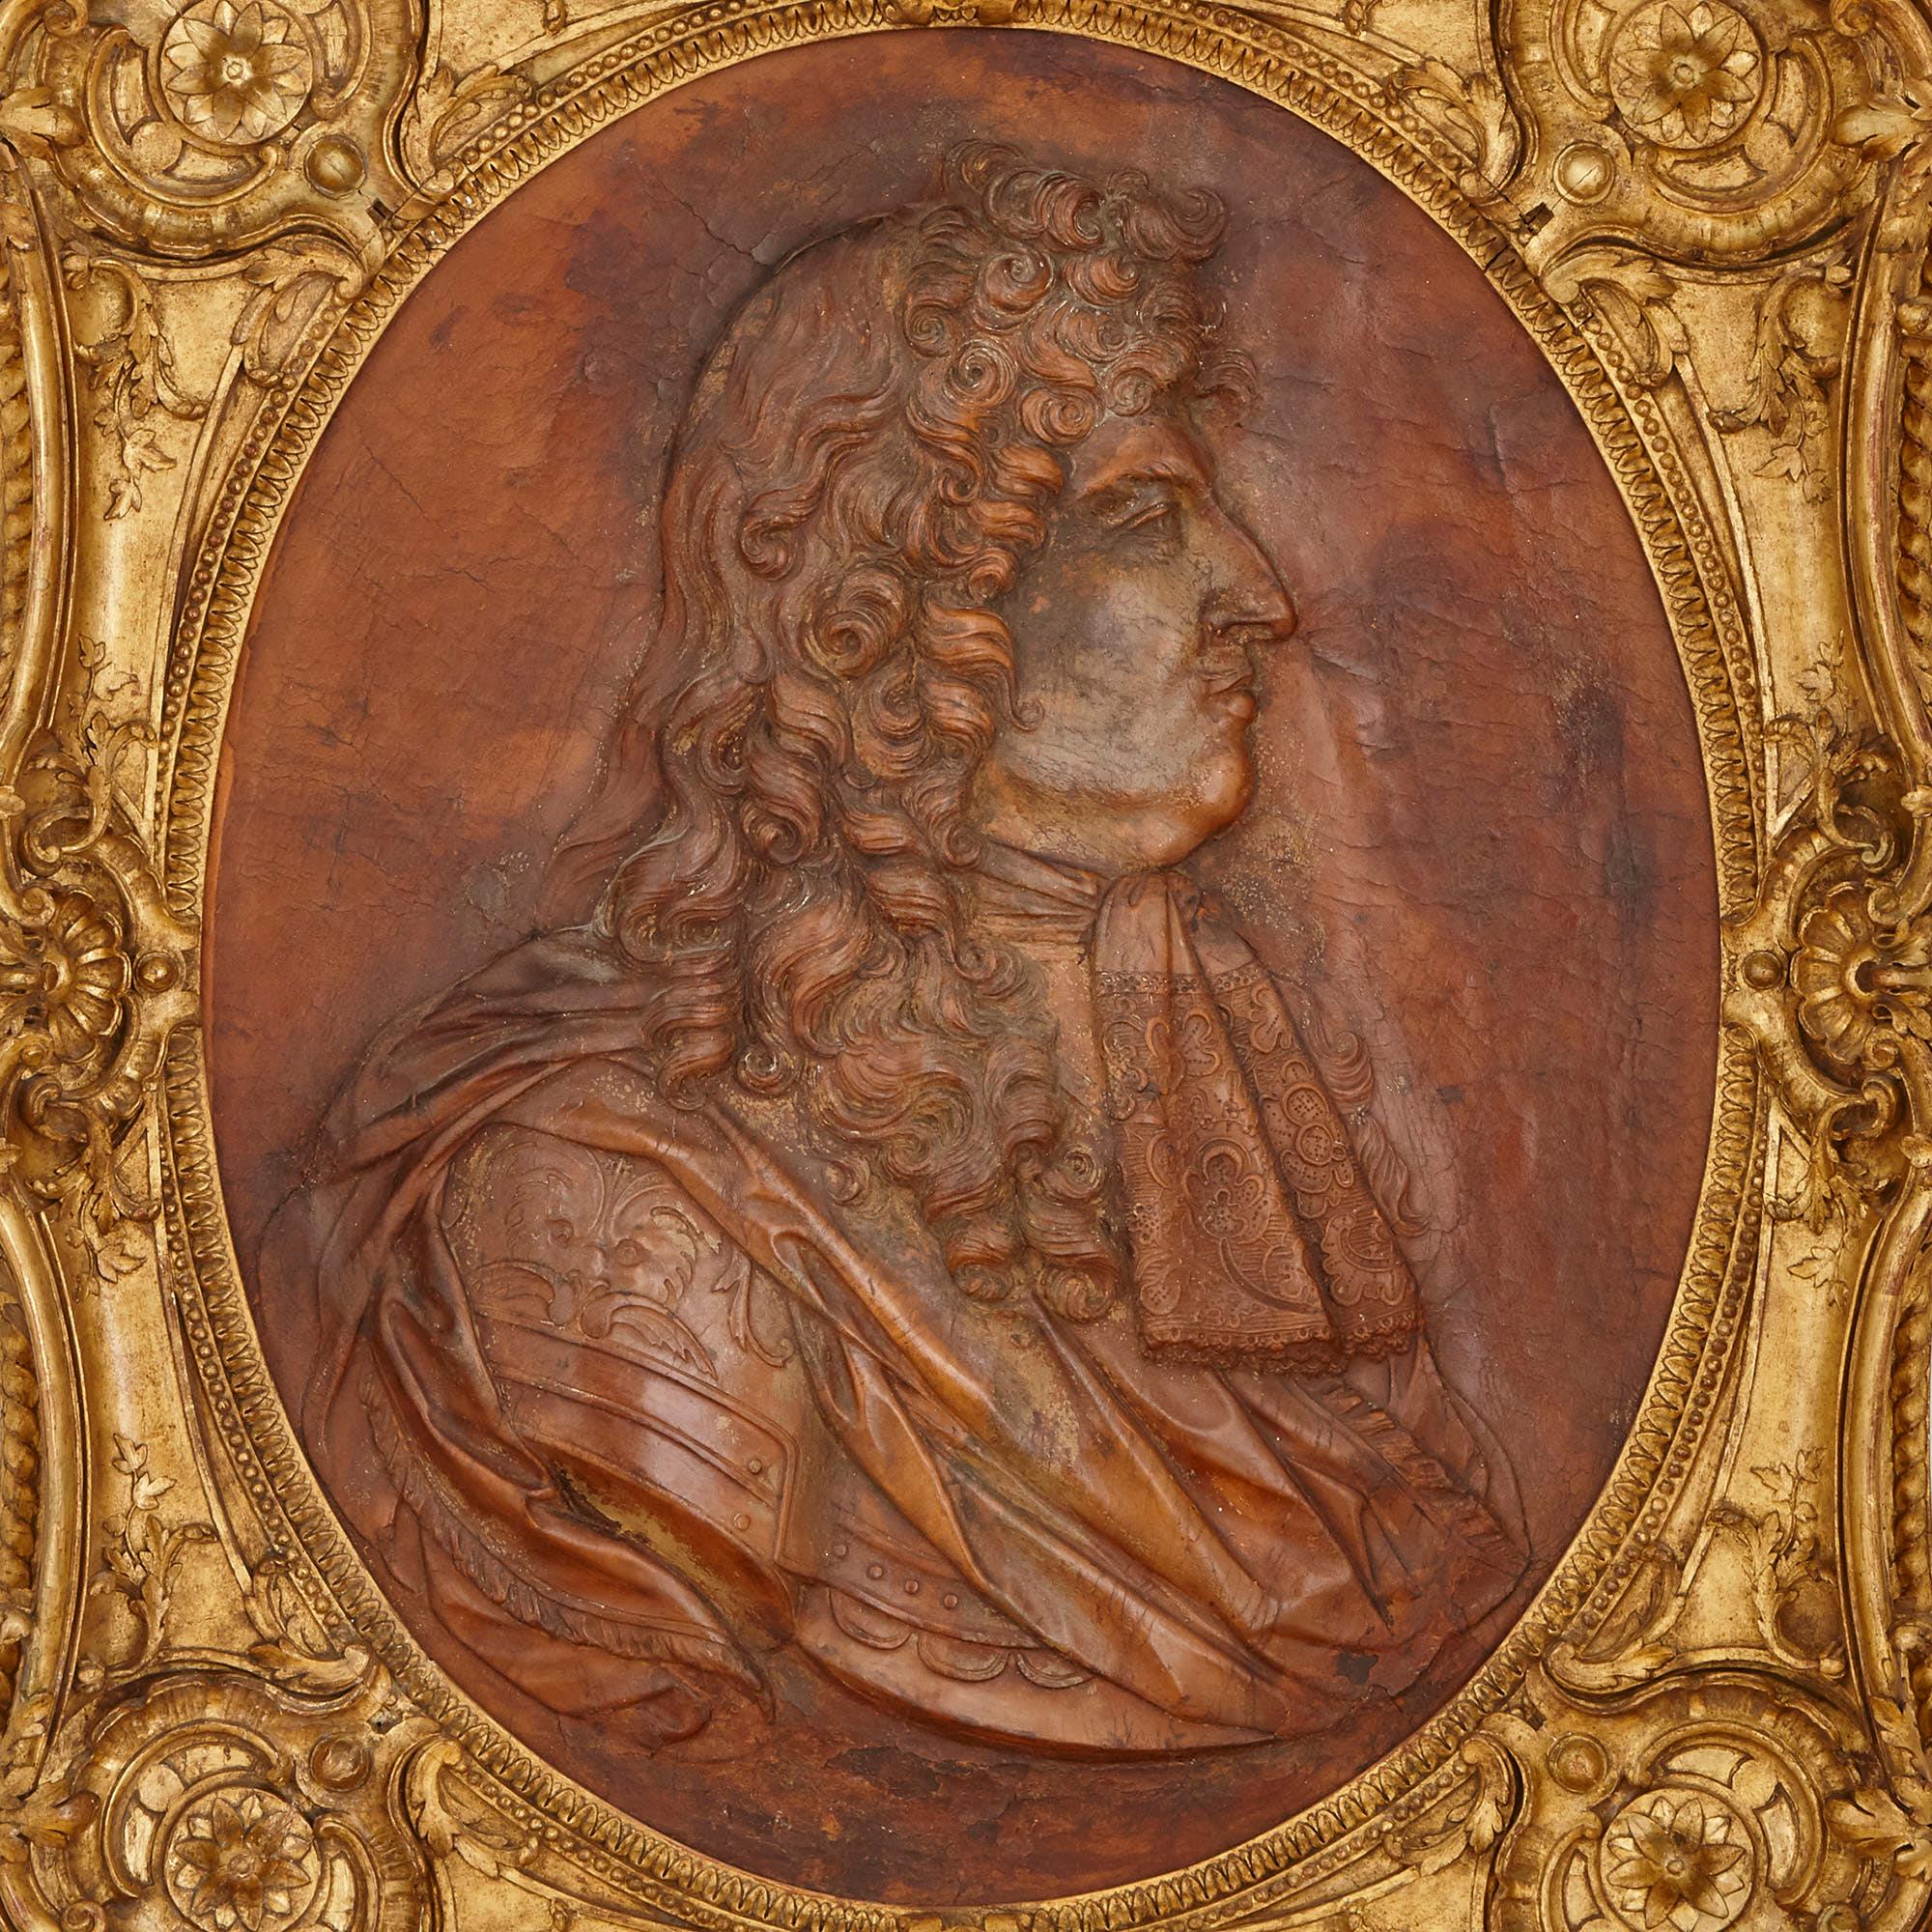 This ‘cuir bouili’ (moulded leather) panel is a truly beautiful and rare piece of early 18th Century art. It is a profile portrait of the French King Louis XIV (1643-1715), depicted at around the age of 50. This image is based on a marble relief